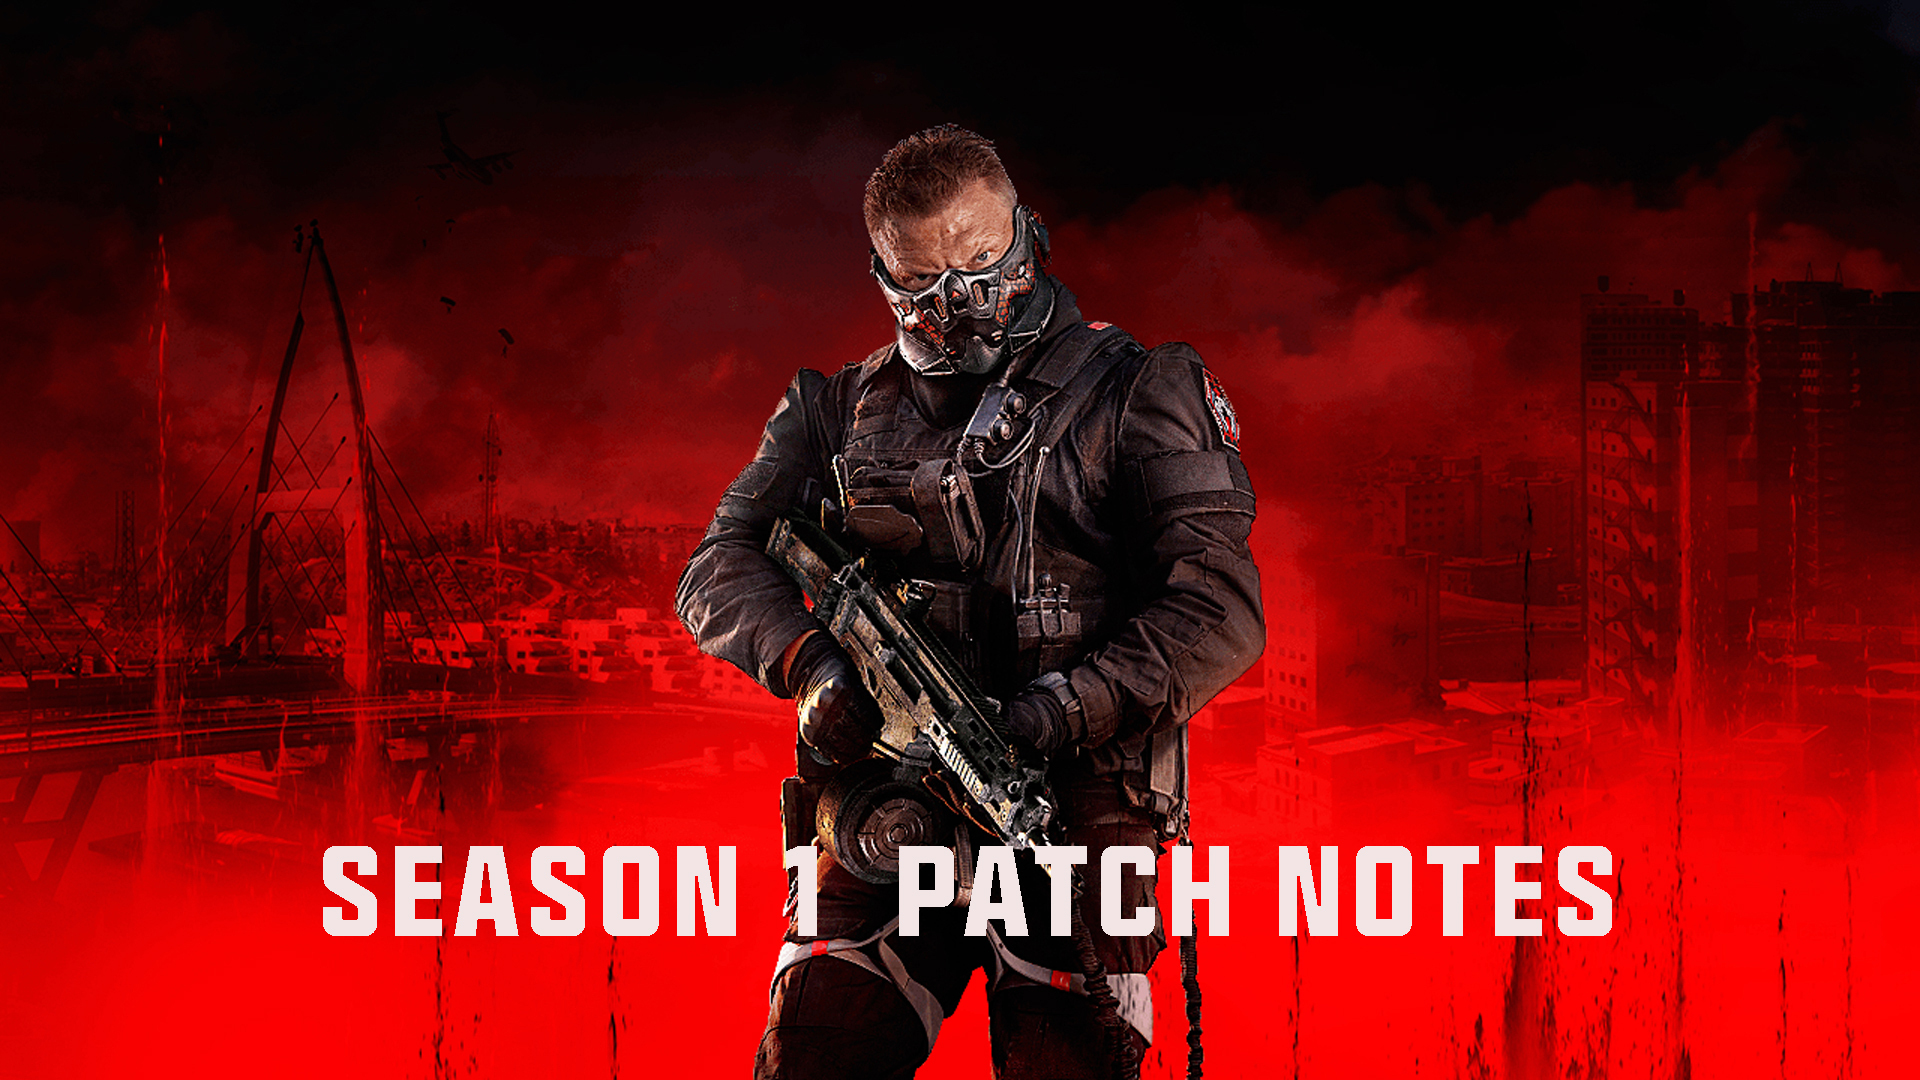 DMZ Season 6 patch notes: The Haunting, new guns, and more - Dot Esports